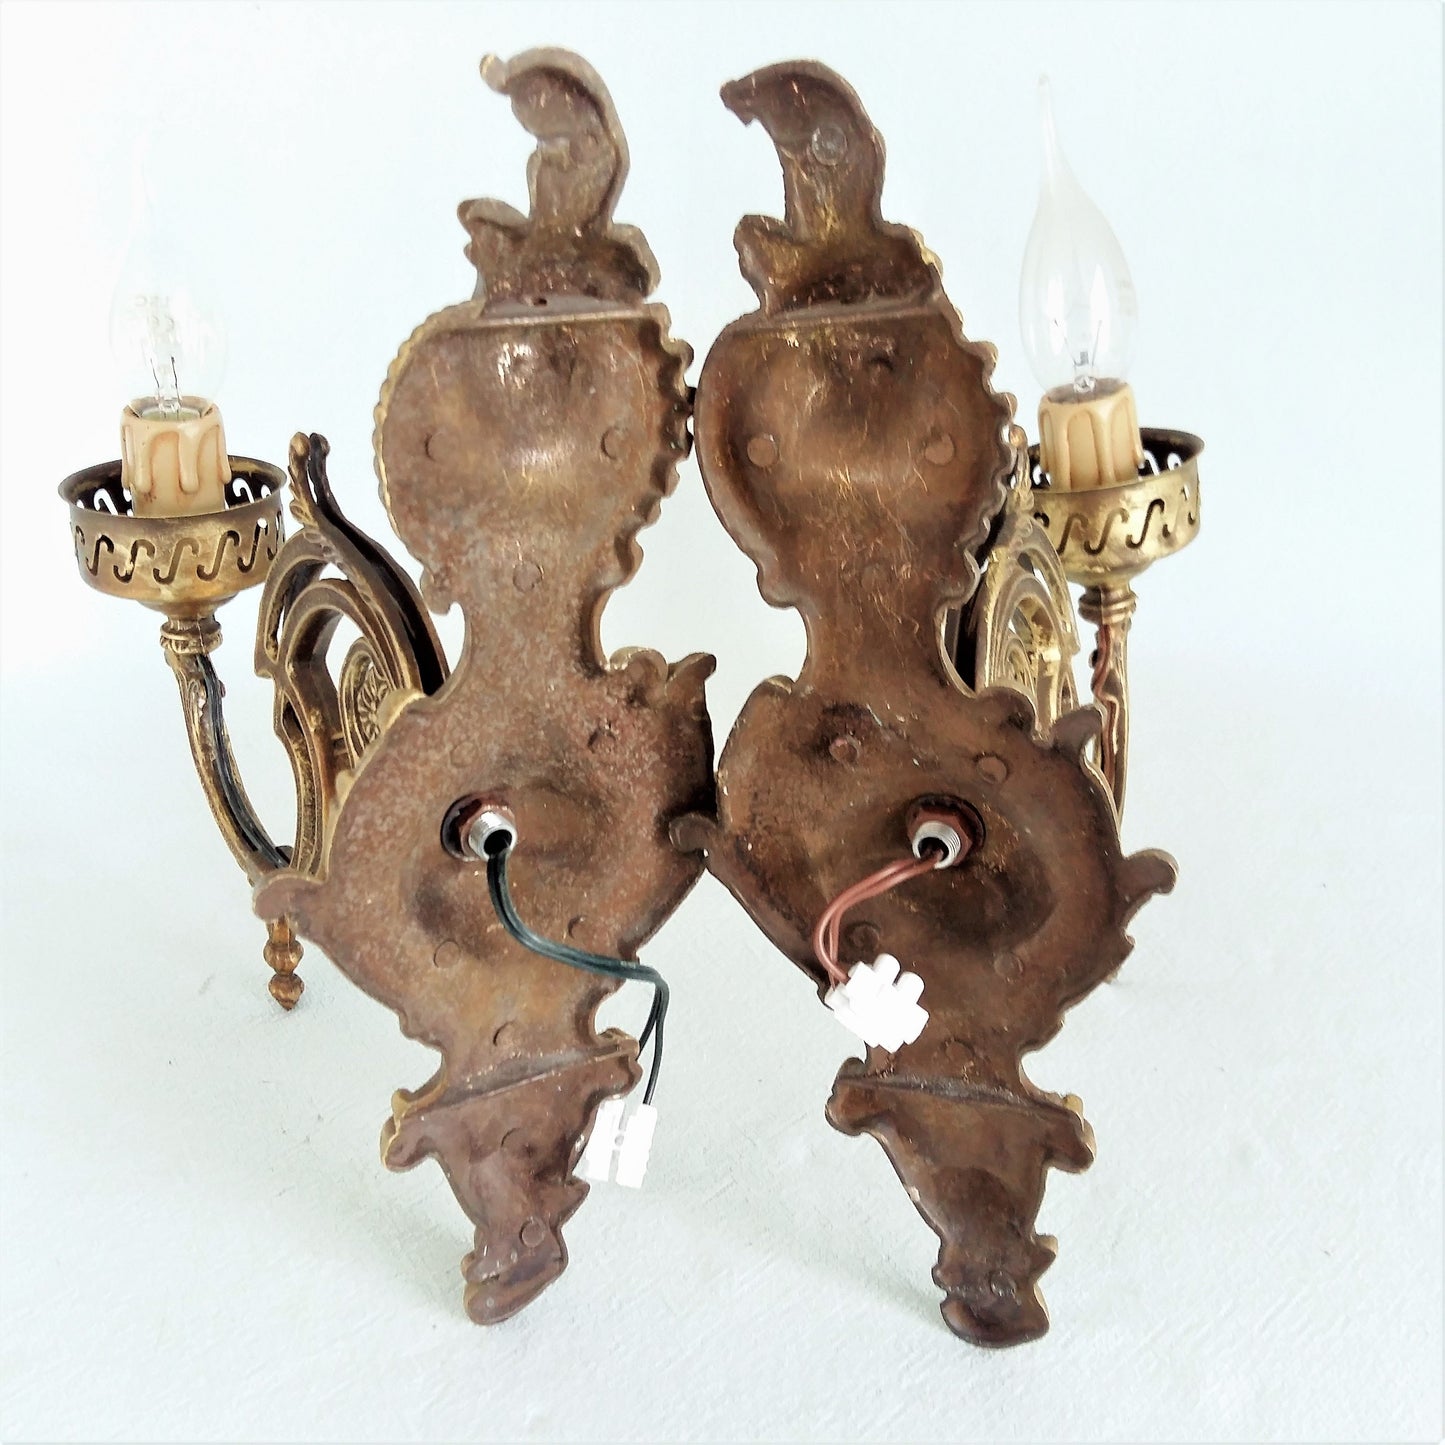 Pair of Ornate Sconces. from Tiggy & Pip - €175.00! Shop now at Tiggy and Pip